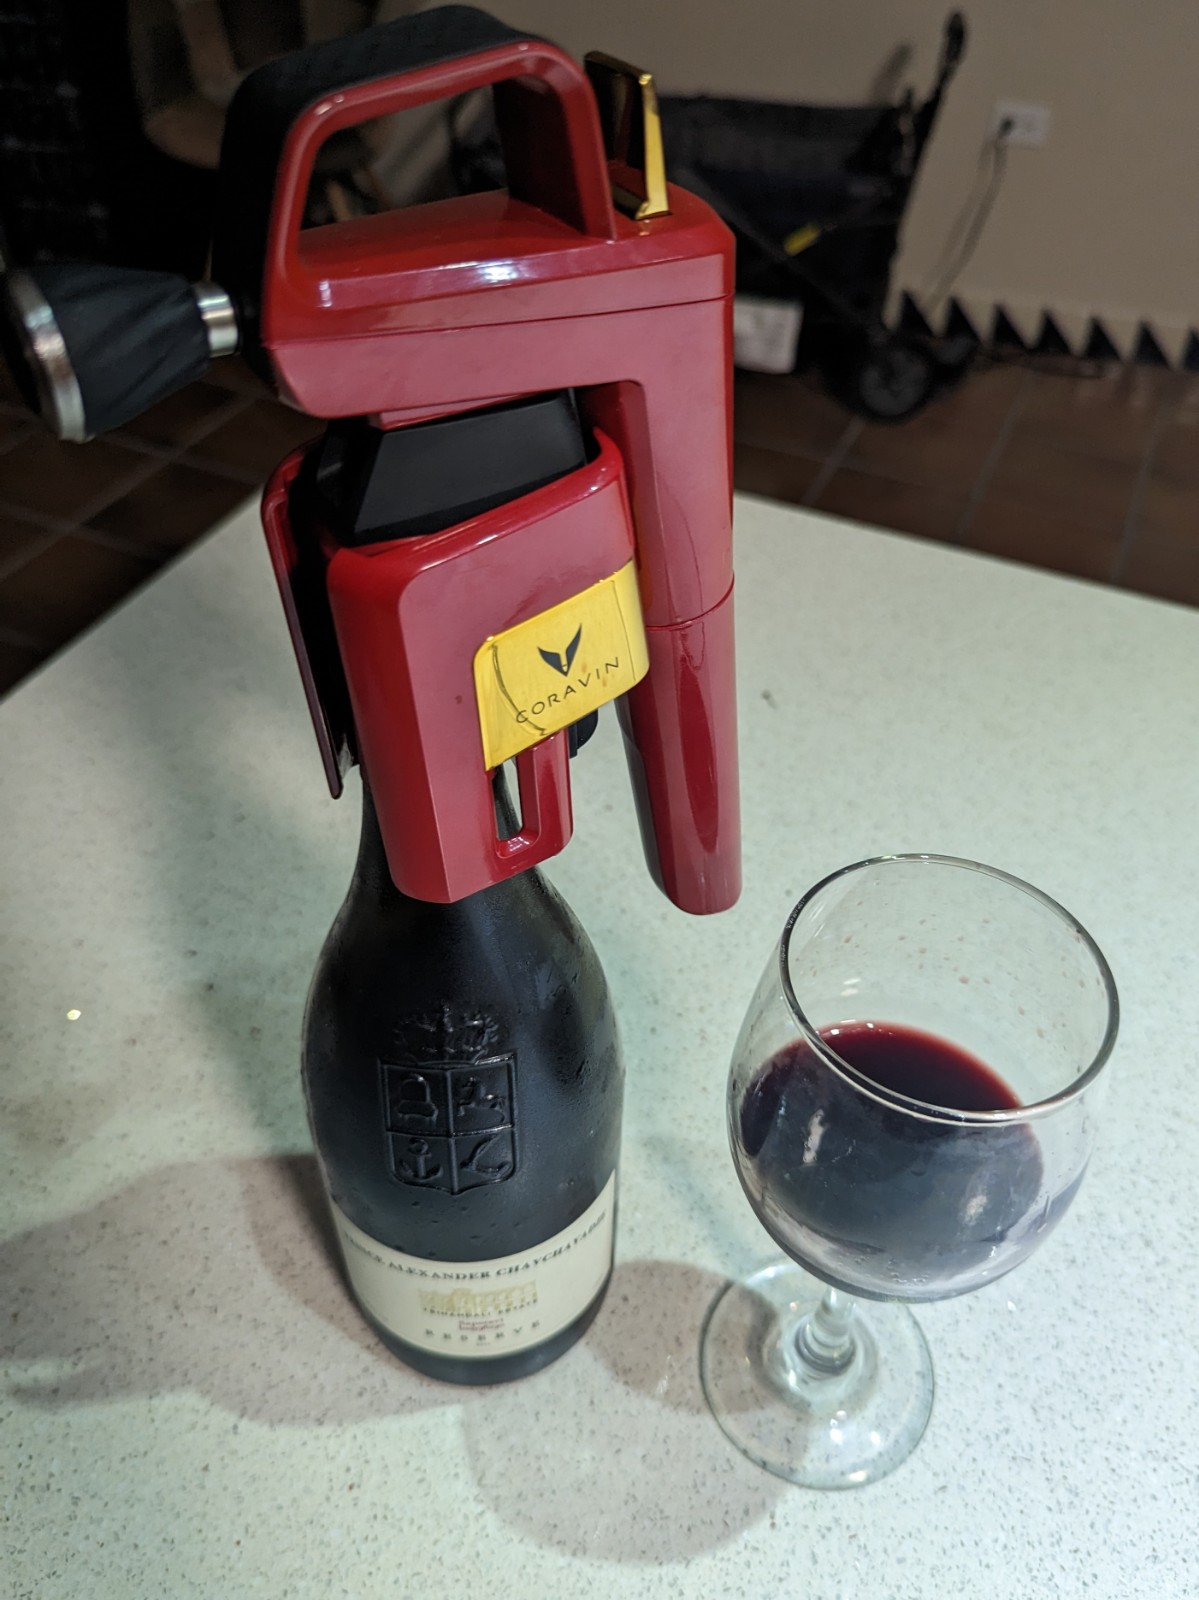 a red wine bottle and glass on a table